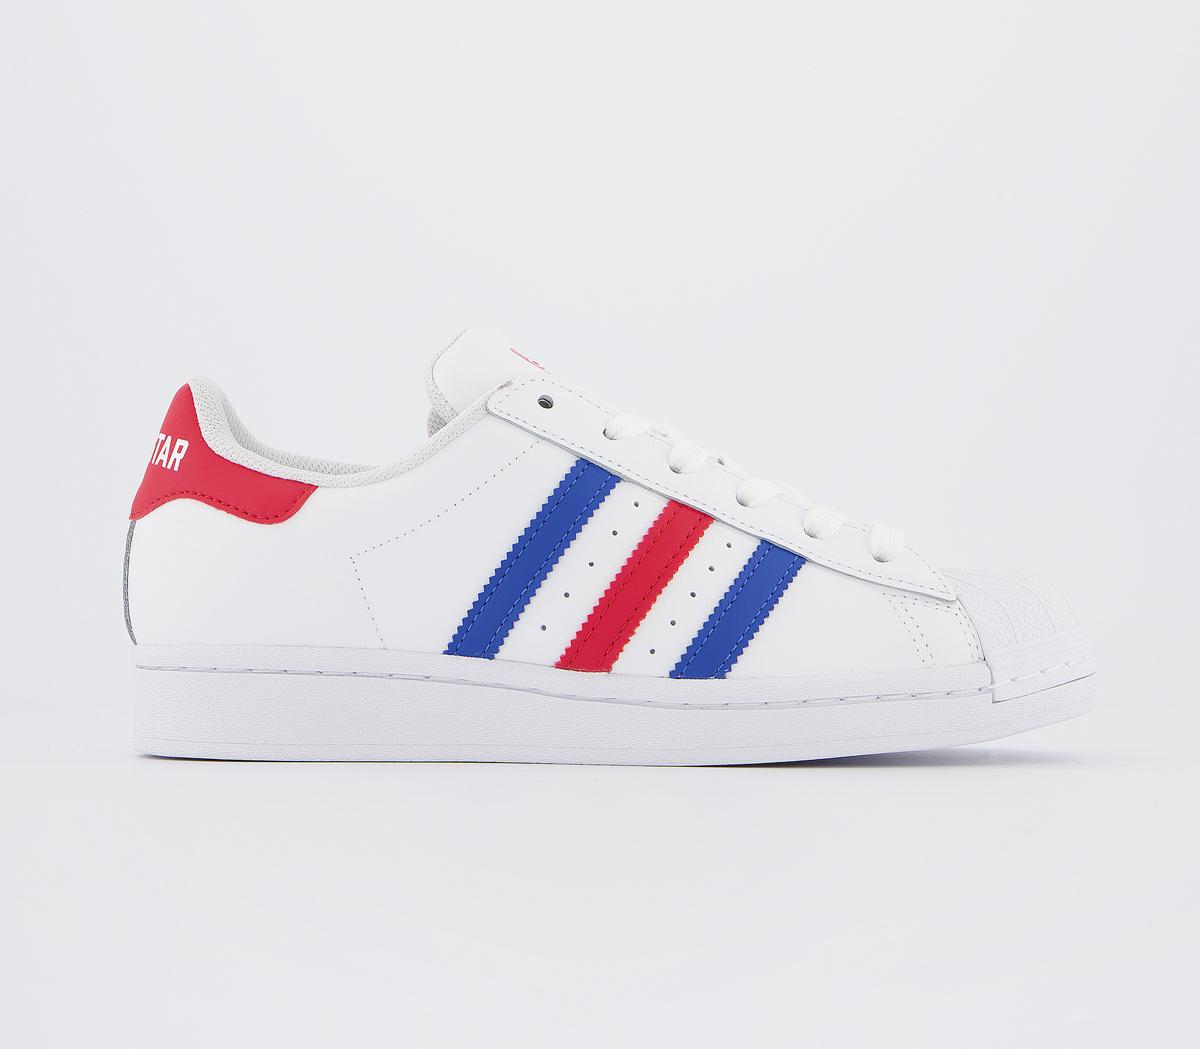 adidas blue womens trainers